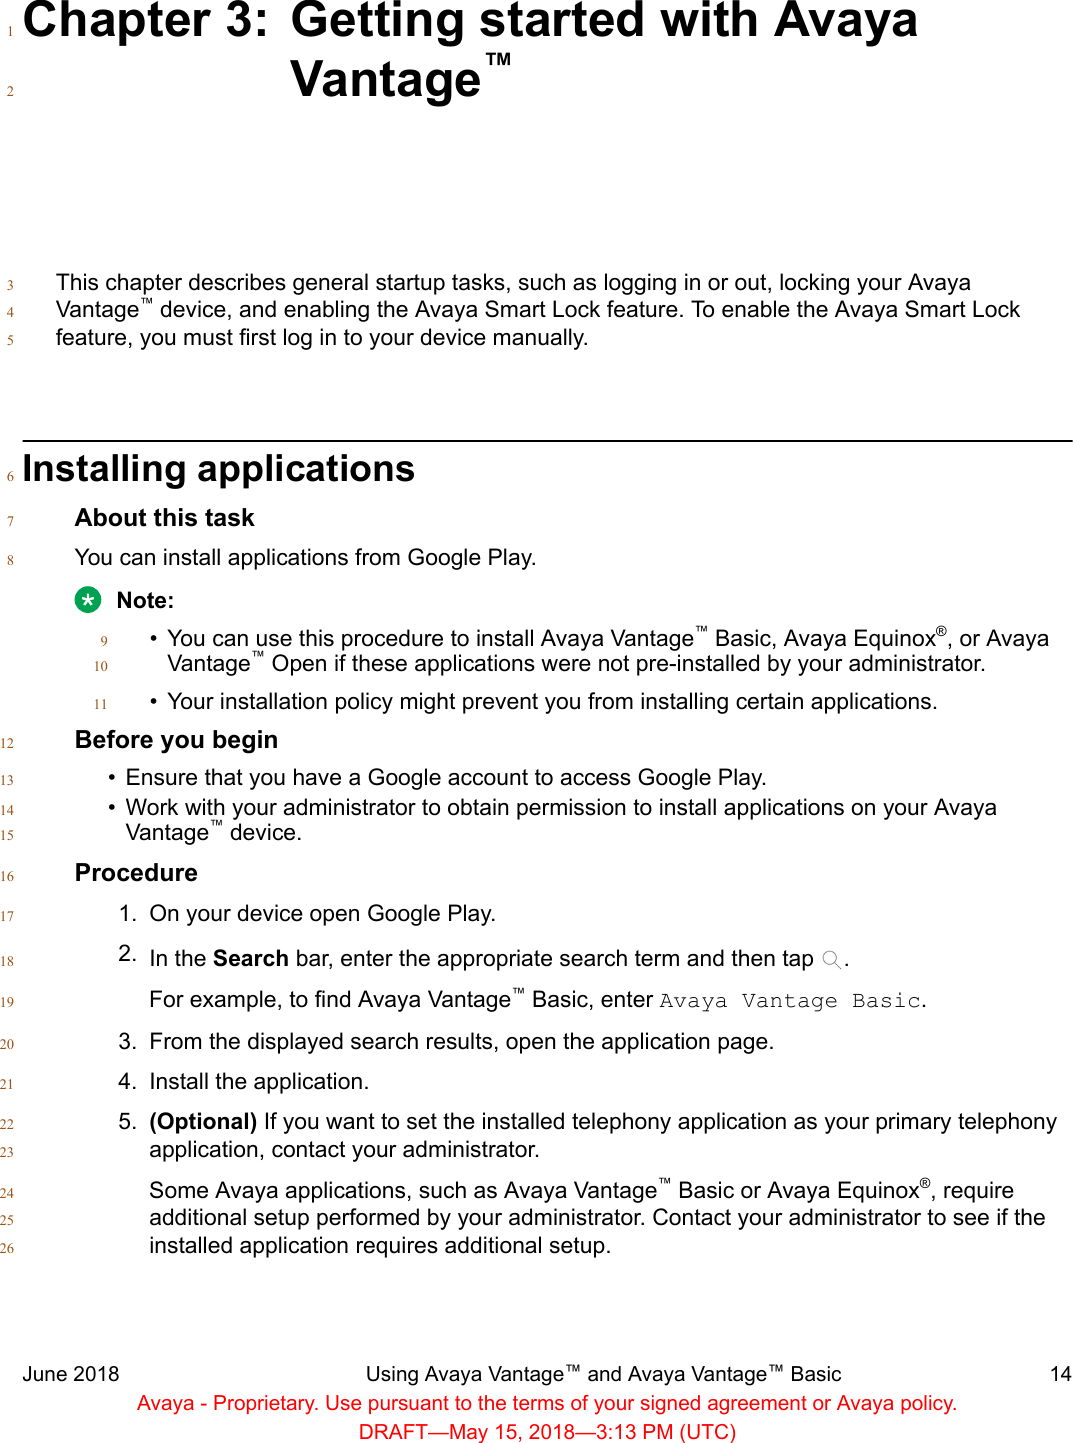 Chapter 3: Getting started with Avaya1Vantage™2This chapter describes general startup tasks, such as logging in or out, locking your Avaya3Vantage™ device, and enabling the Avaya Smart Lock feature. To enable the Avaya Smart Lock4feature, you must first log in to your device manually.5Installing applications6About this task7You can install applications from Google Play.8Note:•You can use this procedure to install Avaya Vantage™ Basic, Avaya Equinox®, or Avaya9Vantage™ Open if these applications were not pre-installed by your administrator.10• Your installation policy might prevent you from installing certain applications.11Before you begin12•Ensure that you have a Google account to access Google Play.13• Work with your administrator to obtain permission to install applications on your Avaya14Vantage™ device.15Procedure161. On your device open Google Play.172. In the Search bar, enter the appropriate search term and then tap  .18For example, to find Avaya Vantage™ Basic, enter Avaya Vantage Basic.193. From the displayed search results, open the application page.204. Install the application.215. (Optional) If you want to set the installed telephony application as your primary telephony22application, contact your administrator.23Some Avaya applications, such as Avaya Vantage™ Basic or Avaya Equinox®, require24additional setup performed by your administrator. Contact your administrator to see if the25installed application requires additional setup.26June 2018 Using Avaya Vantage™ and Avaya Vantage™ Basic 14Avaya - Proprietary. Use pursuant to the terms of your signed agreement or Avaya policy.DRAFT—May 15, 2018—3:13 PM (UTC)